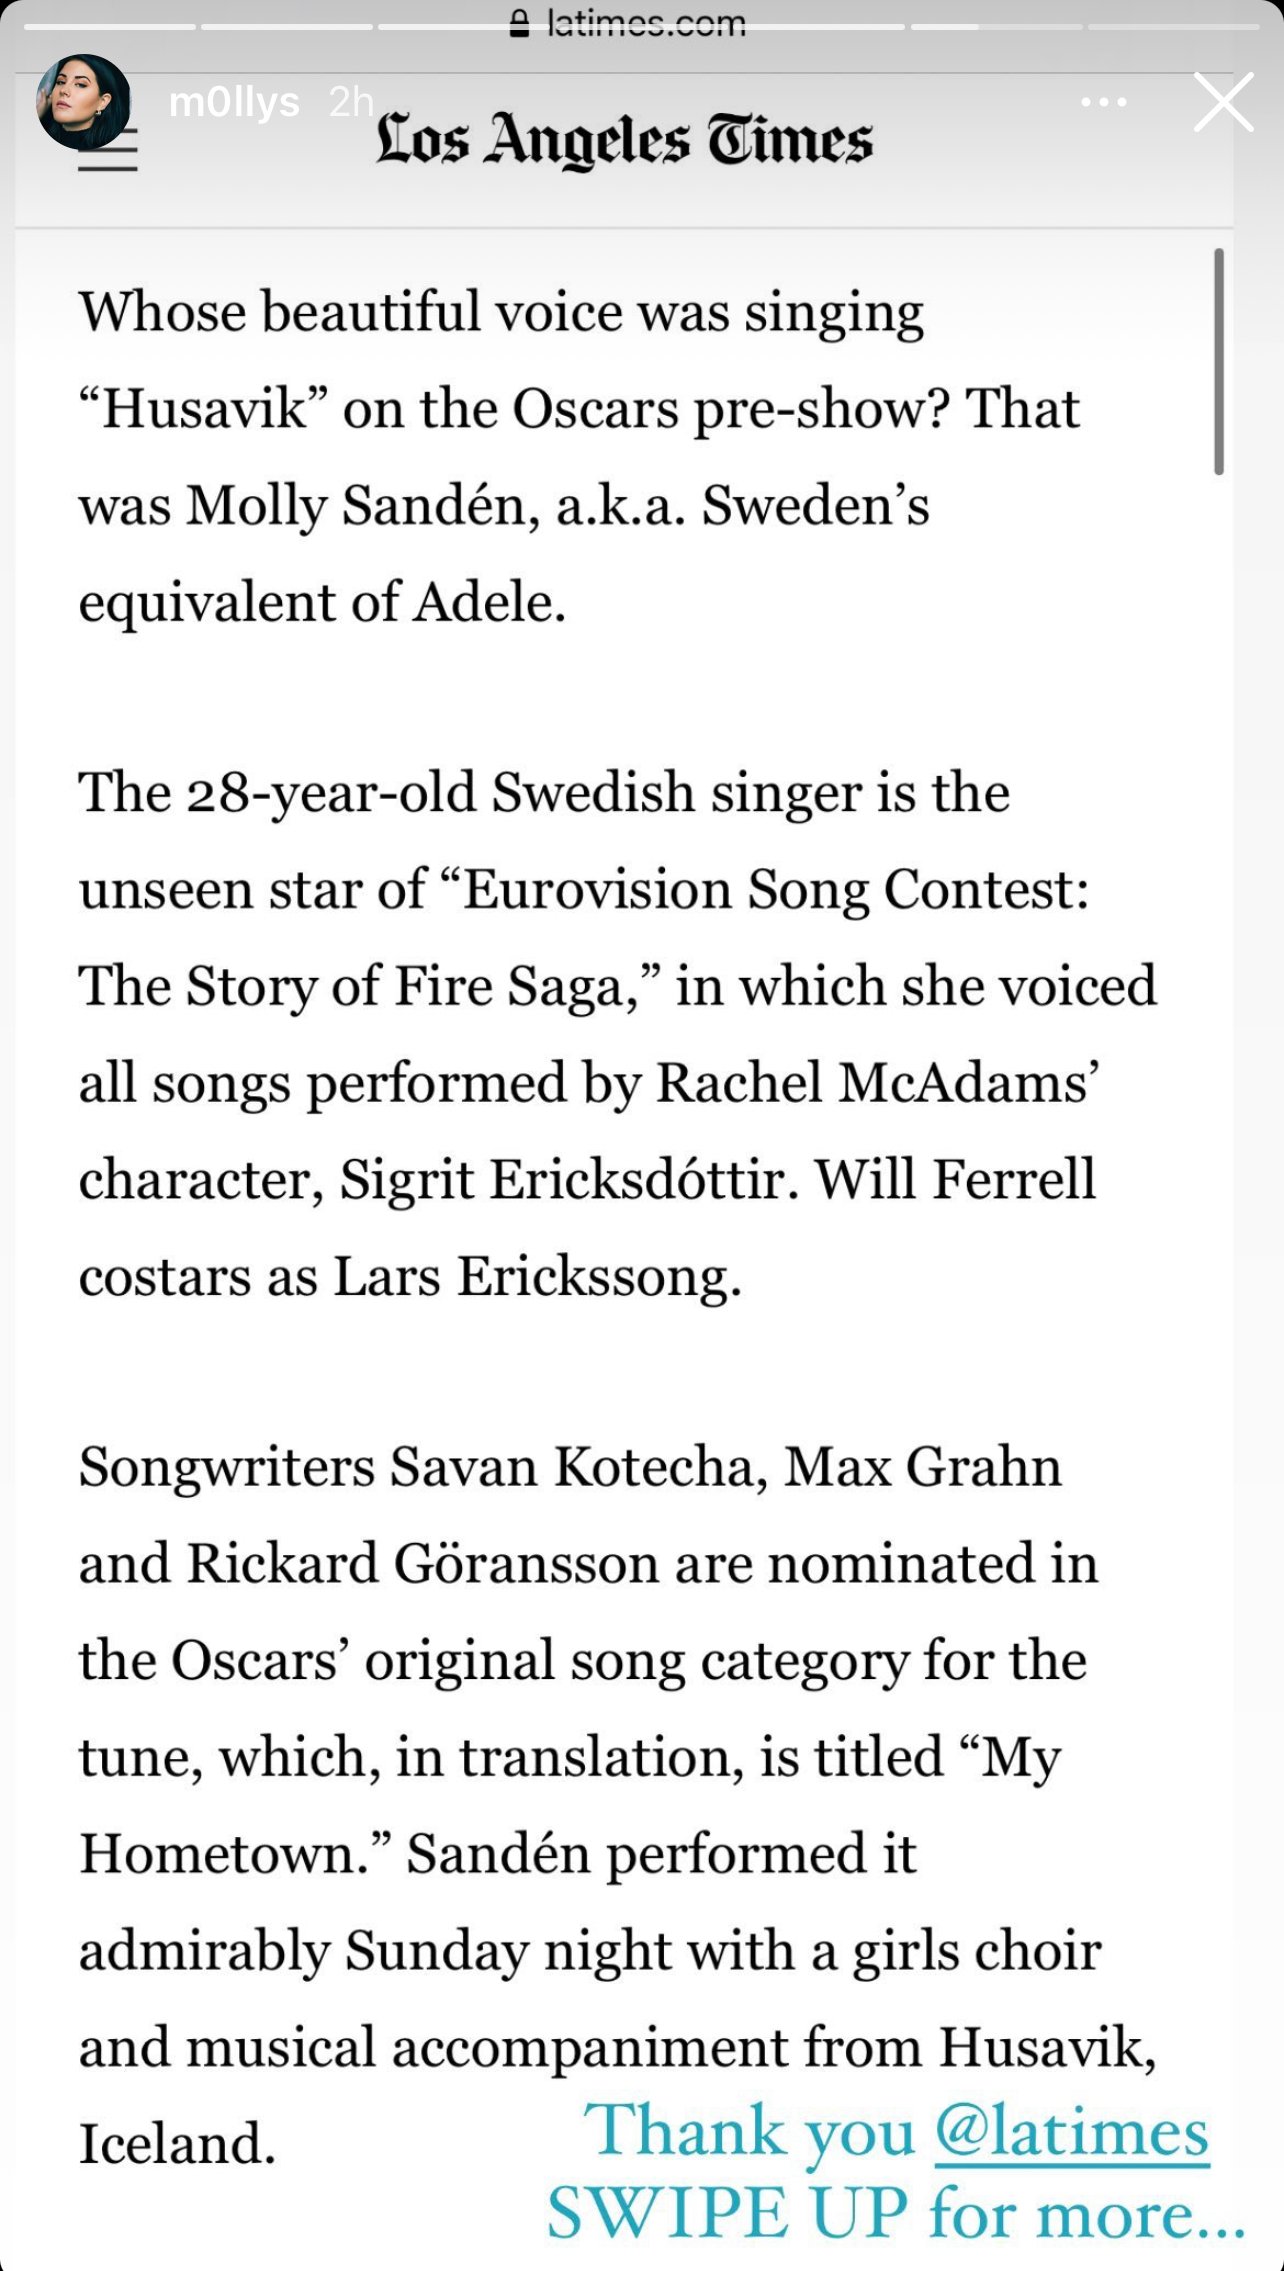 Whose beautiful voice was singing “Husavik” on the Oscars pre-show? That was Molly Sandén, a.k.a. Sweden’s equivalent of Adele. The 28-year-old Swedish singer is the unseen star of “Eurovision Song Contest: The Story of Fire Saga,” in which she voiced all songs performed by Rachel McAdams’ character, Sigrit Ericksdóttir. Will Ferrell costars as Lars Erickssong. Songwriters Savan Kotecha, Max Grahn and Rickard Göransson are nominated in the Oscars’ original song category for the tune, which, in translation, is titled “My Hometown.” Sandén performed it admirably Sunday night with a girls choir and musical accompaniment from Husavik, Iceland.